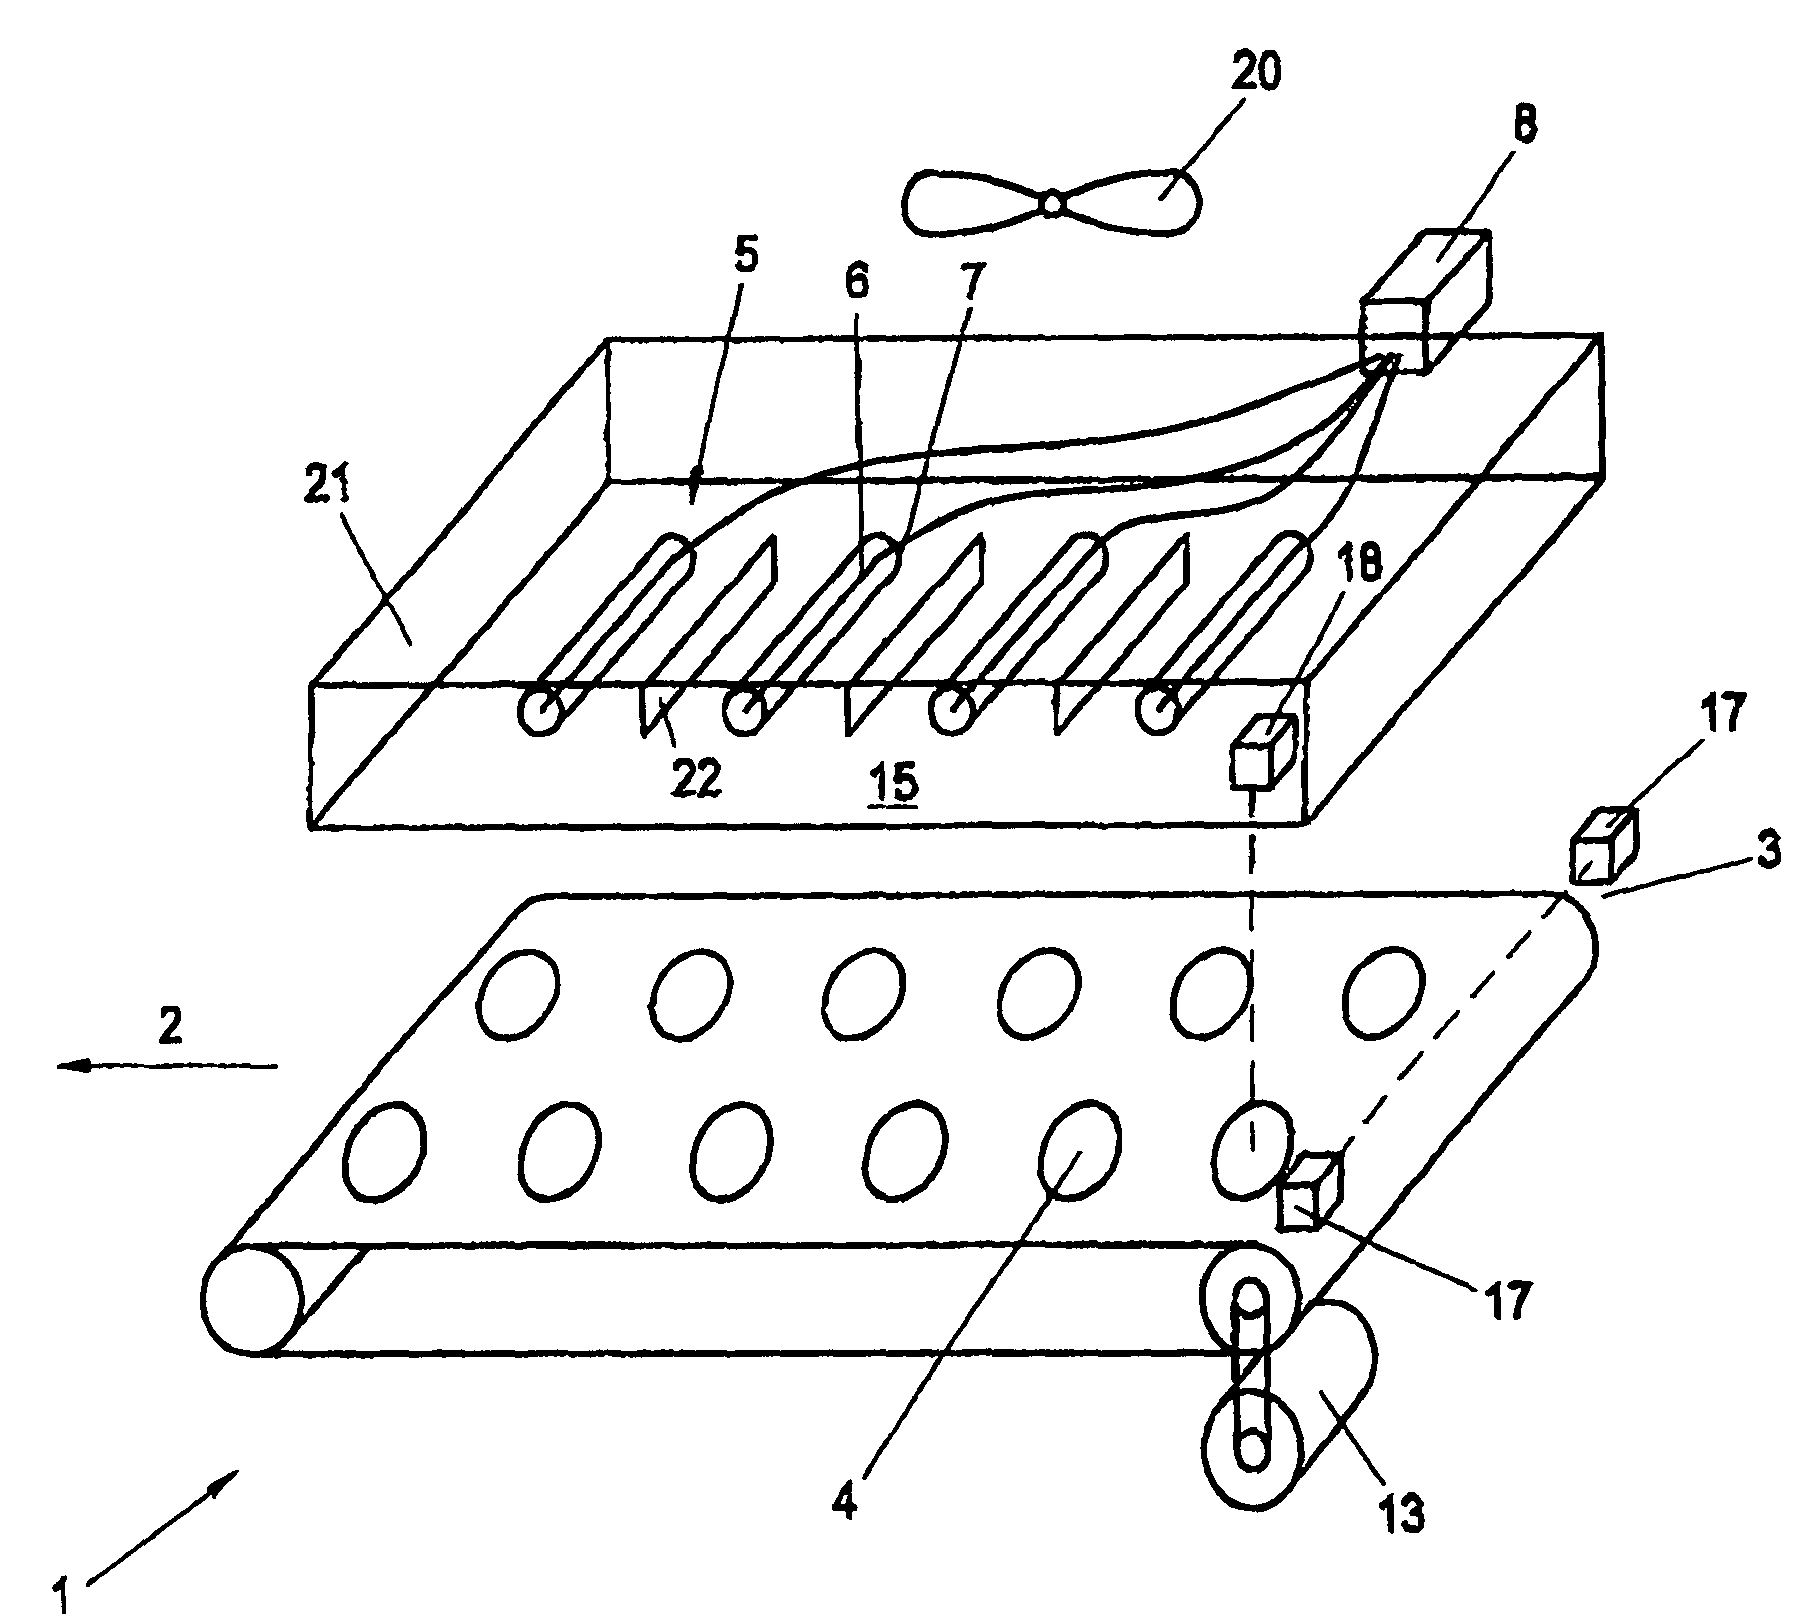 Baking apparatus and method for baking edible products